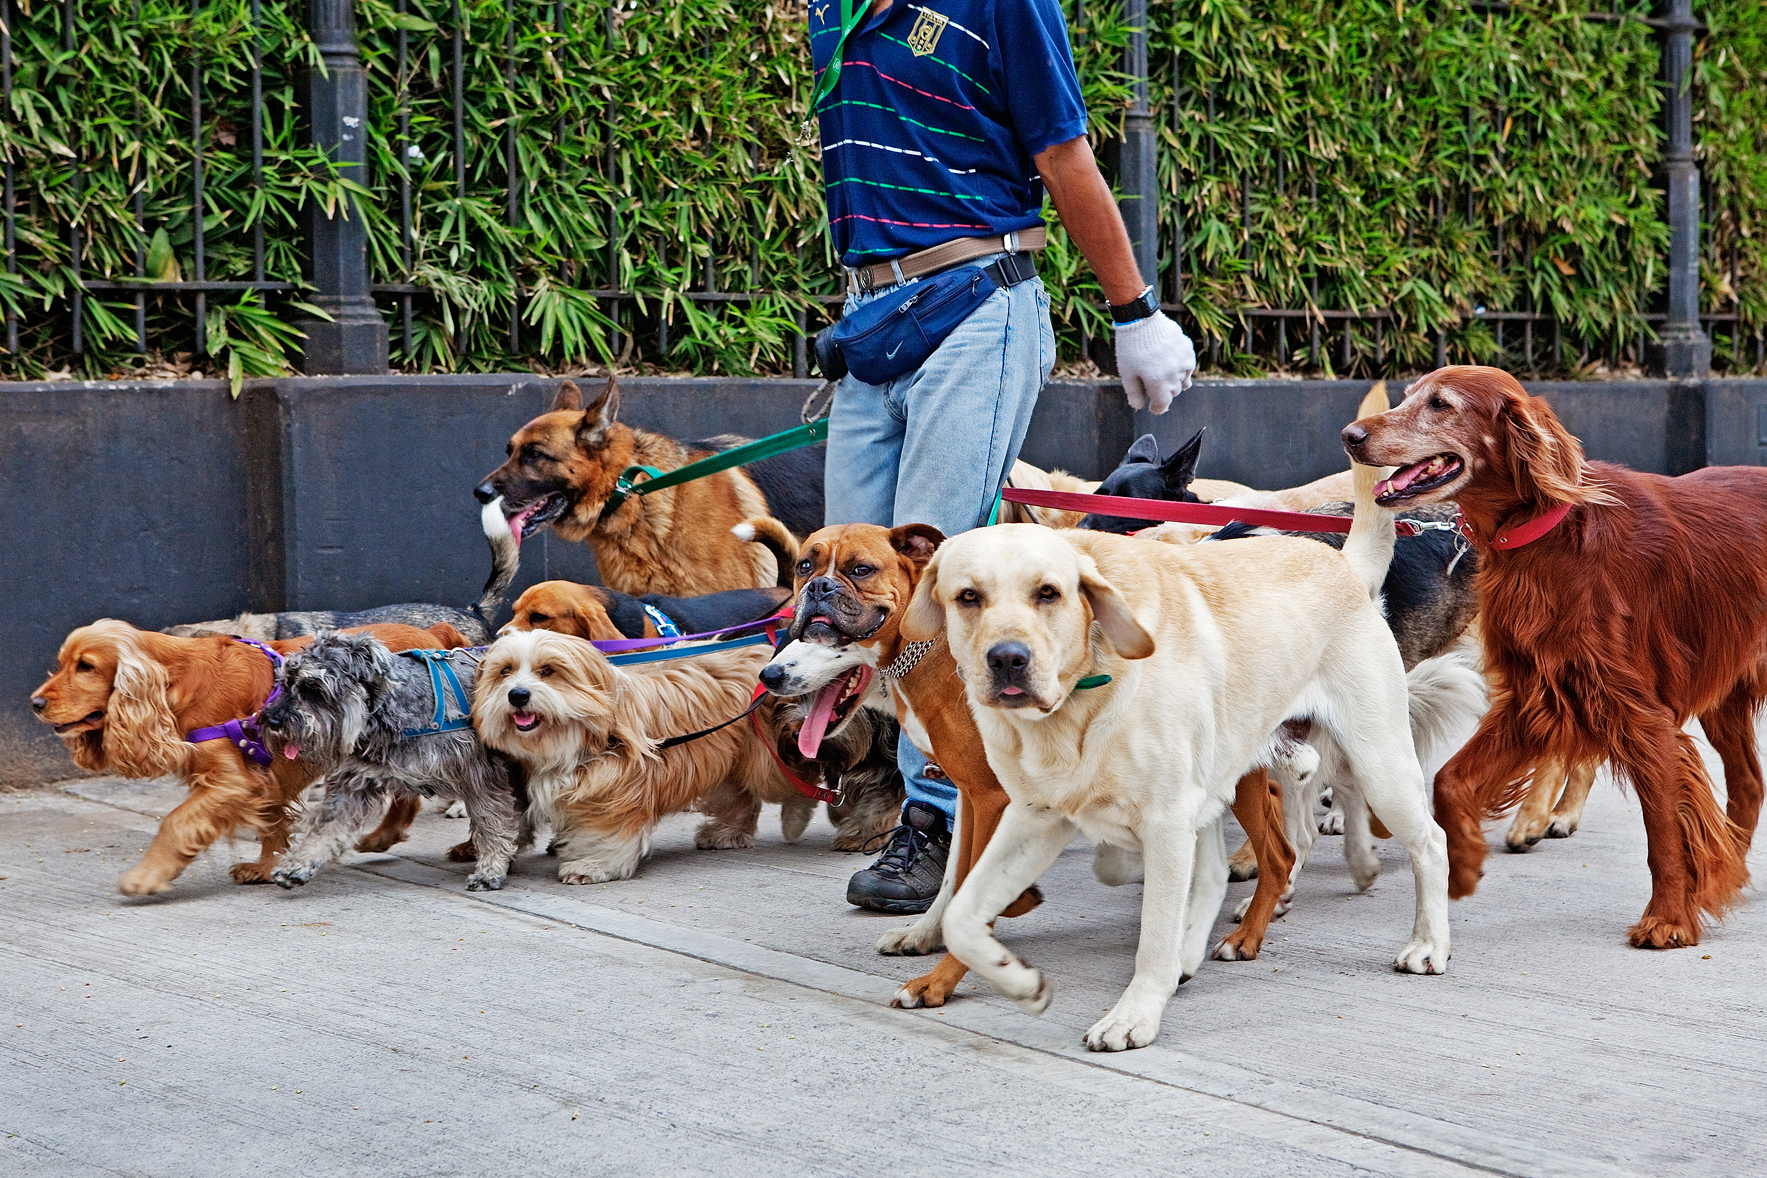 Why You Should Give an Extra Big Holiday Tip to Your Dog Walker and Babysitter This Year